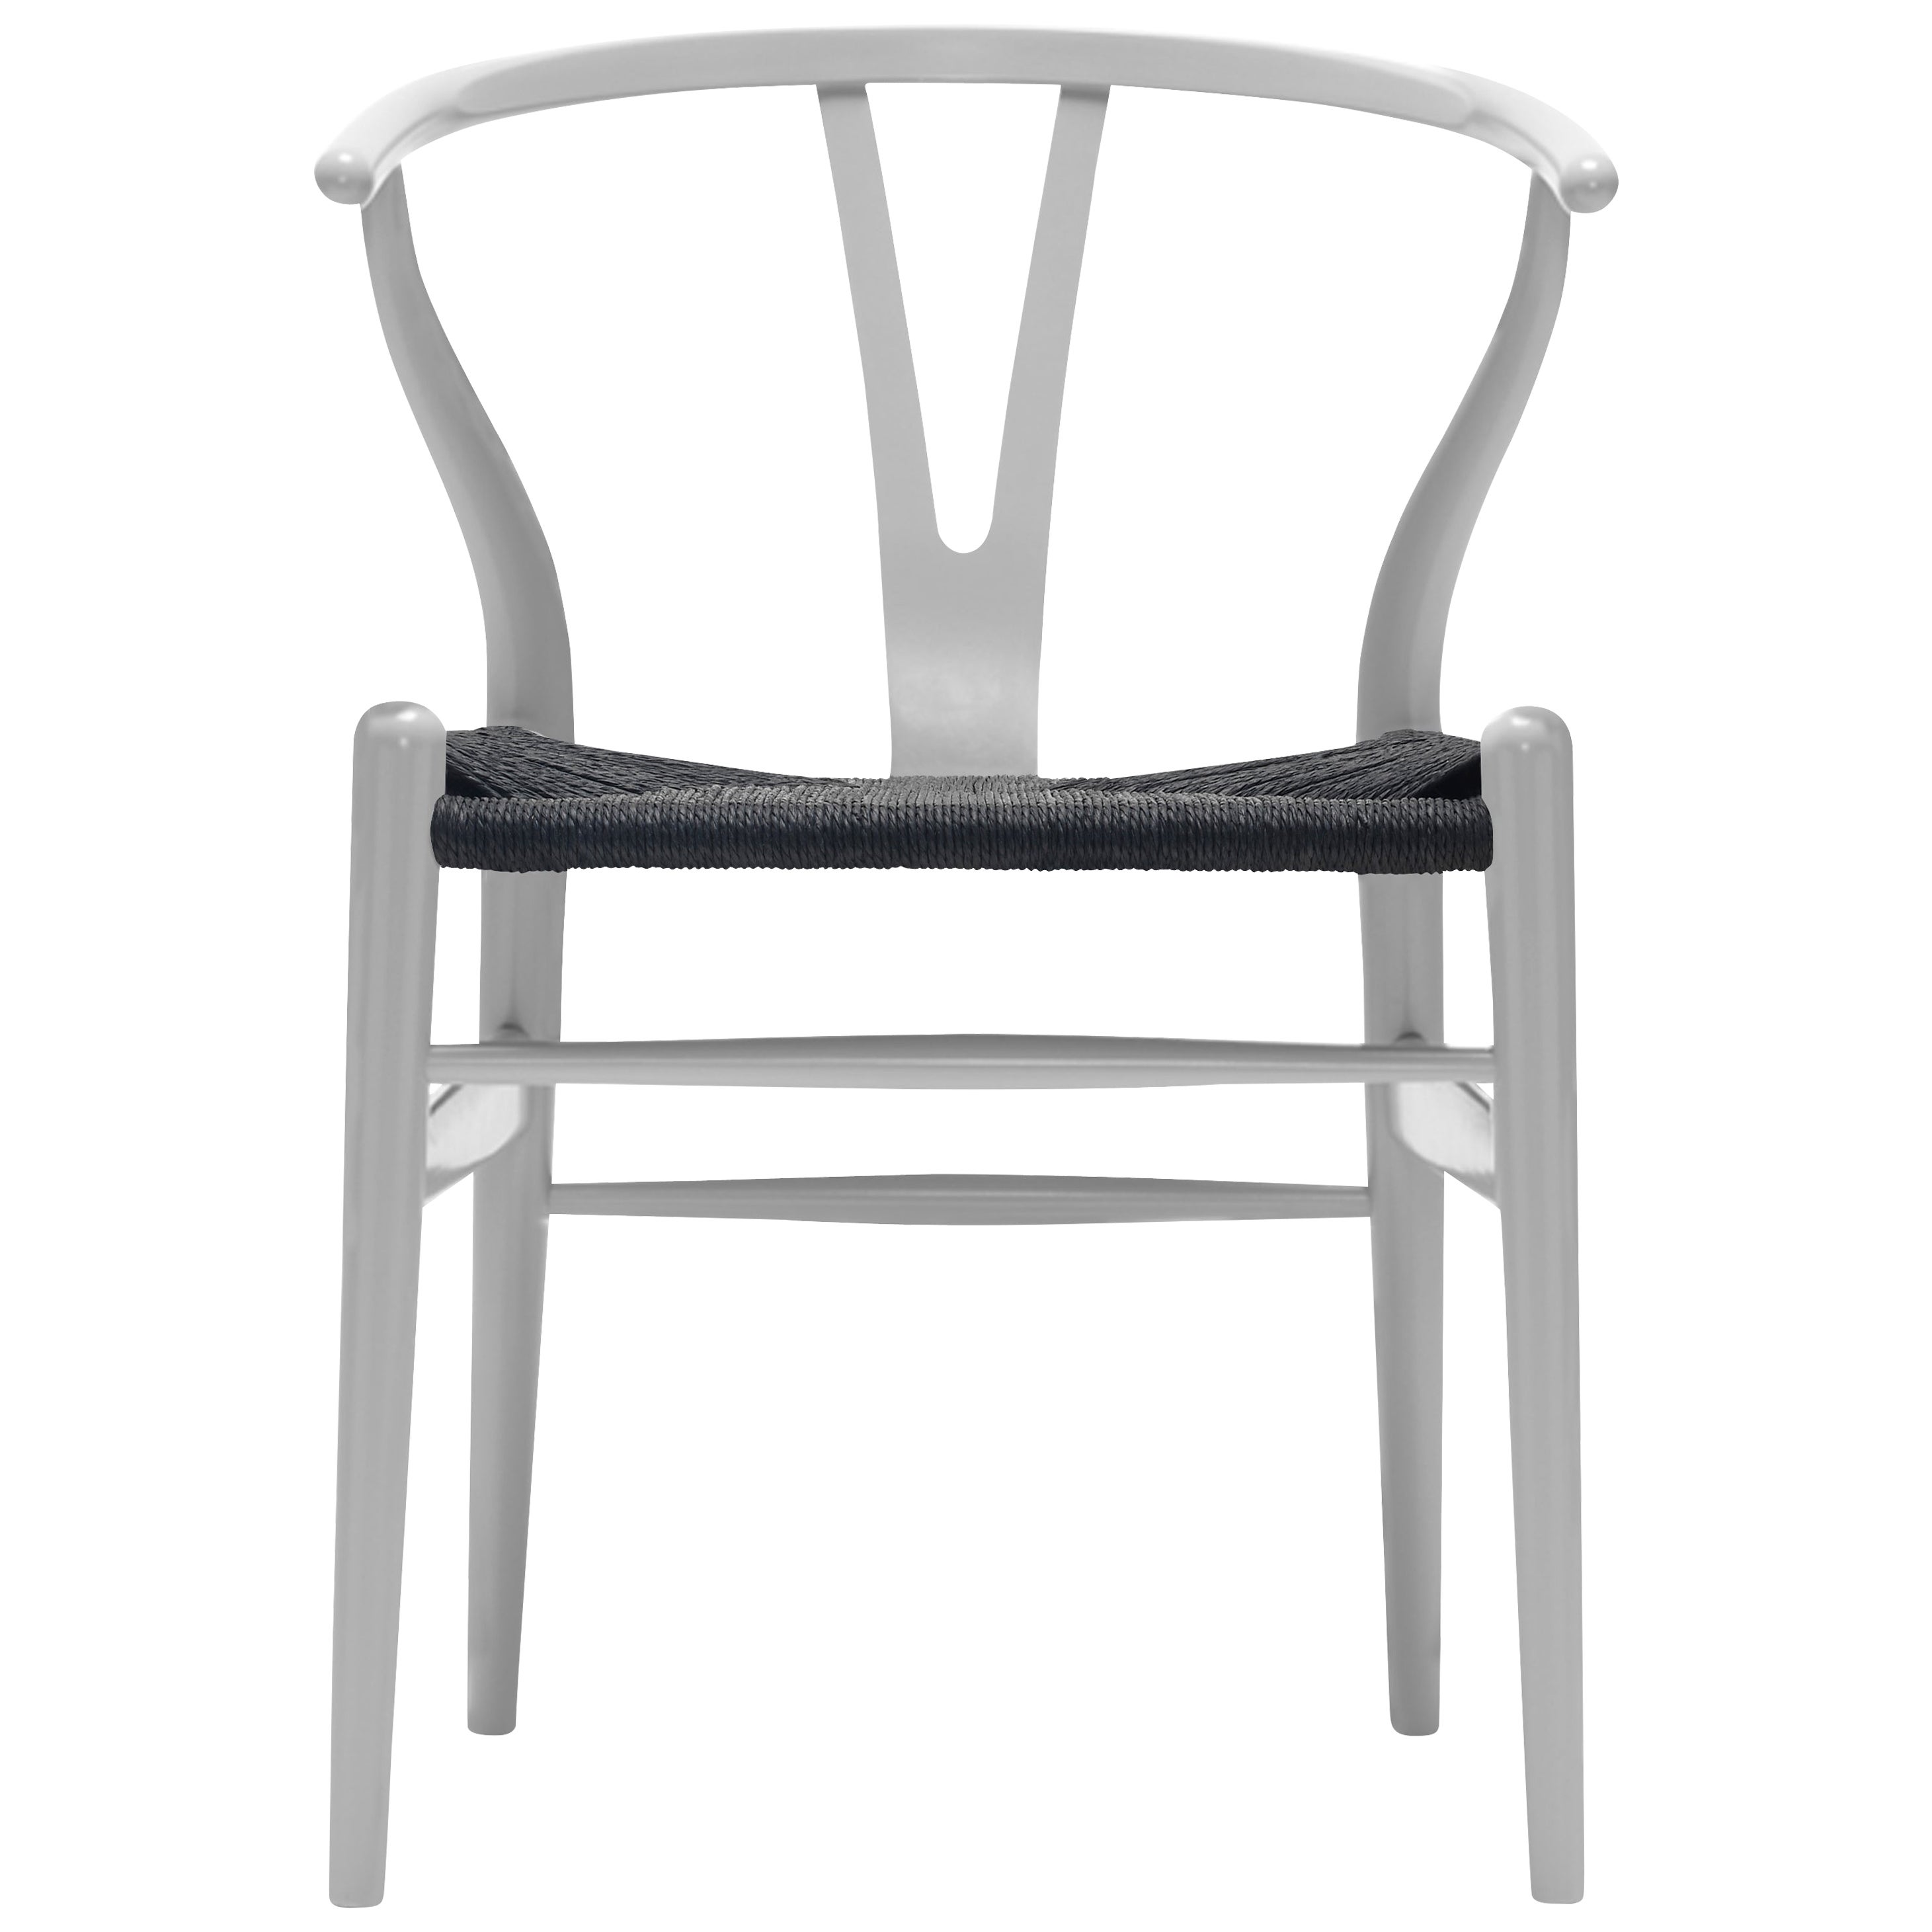 CH24 Wishbone Chair in Silver Gray with Black Papercord Seat by Hans Wegner